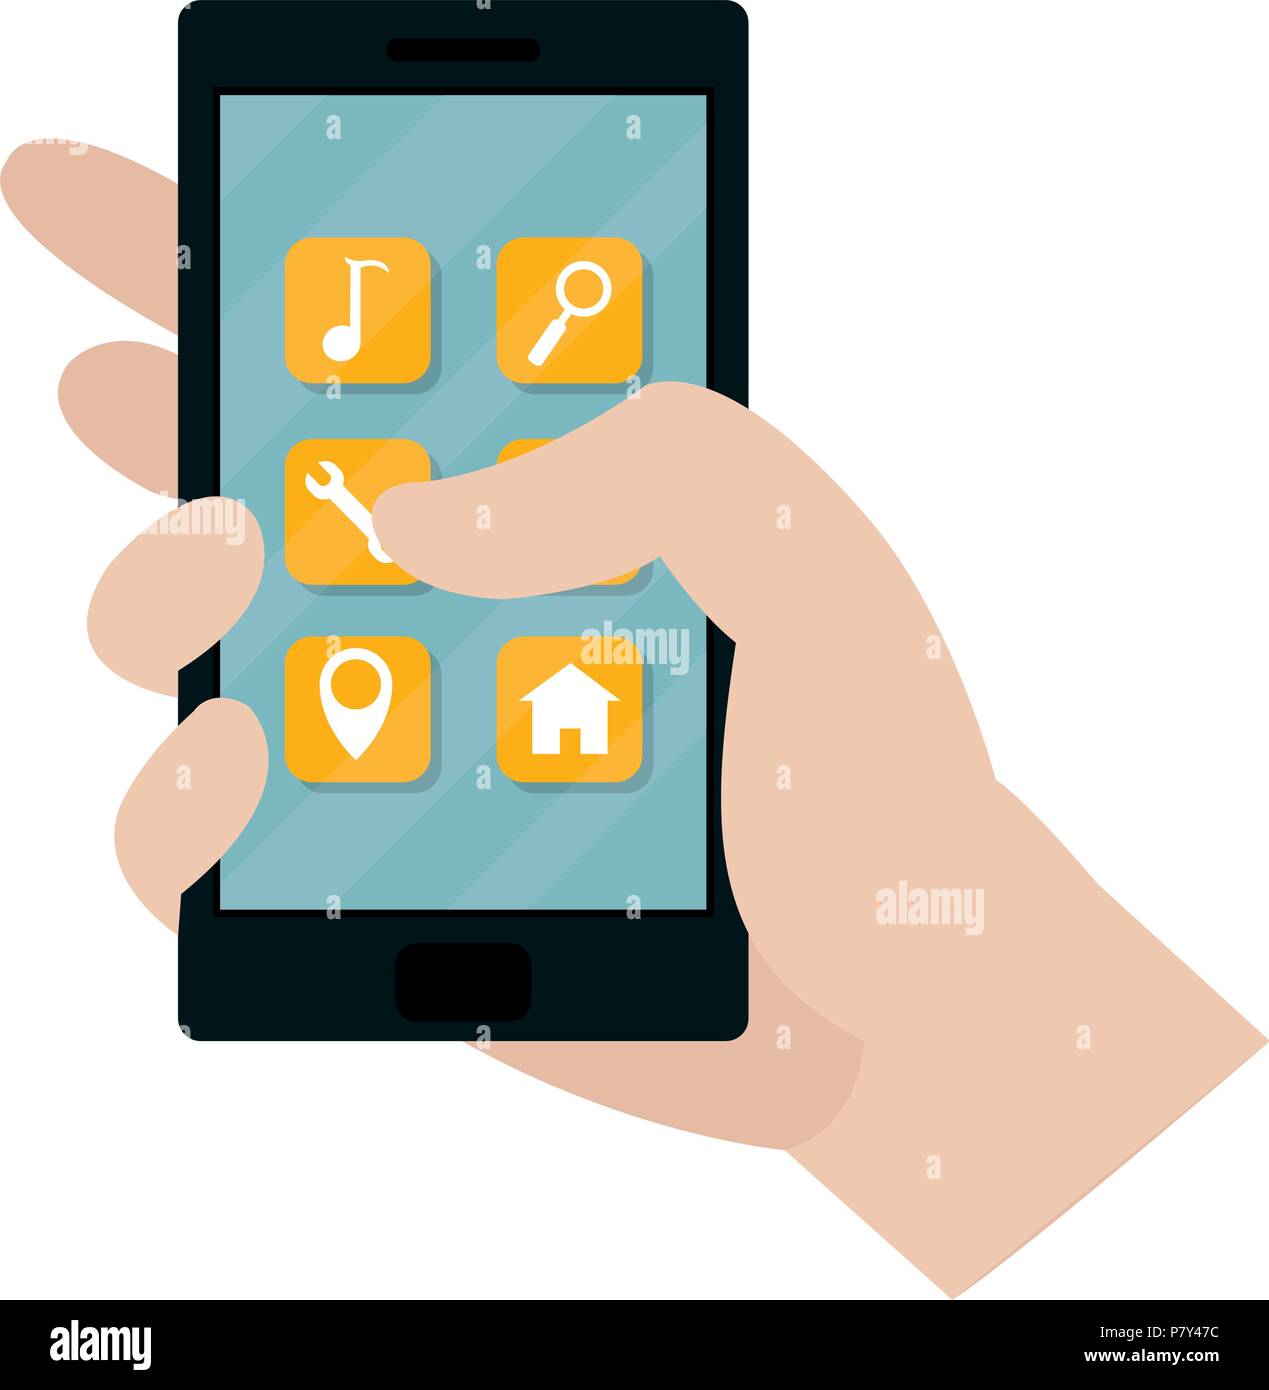 smartphone technology with digitals apps icon Stock Vector